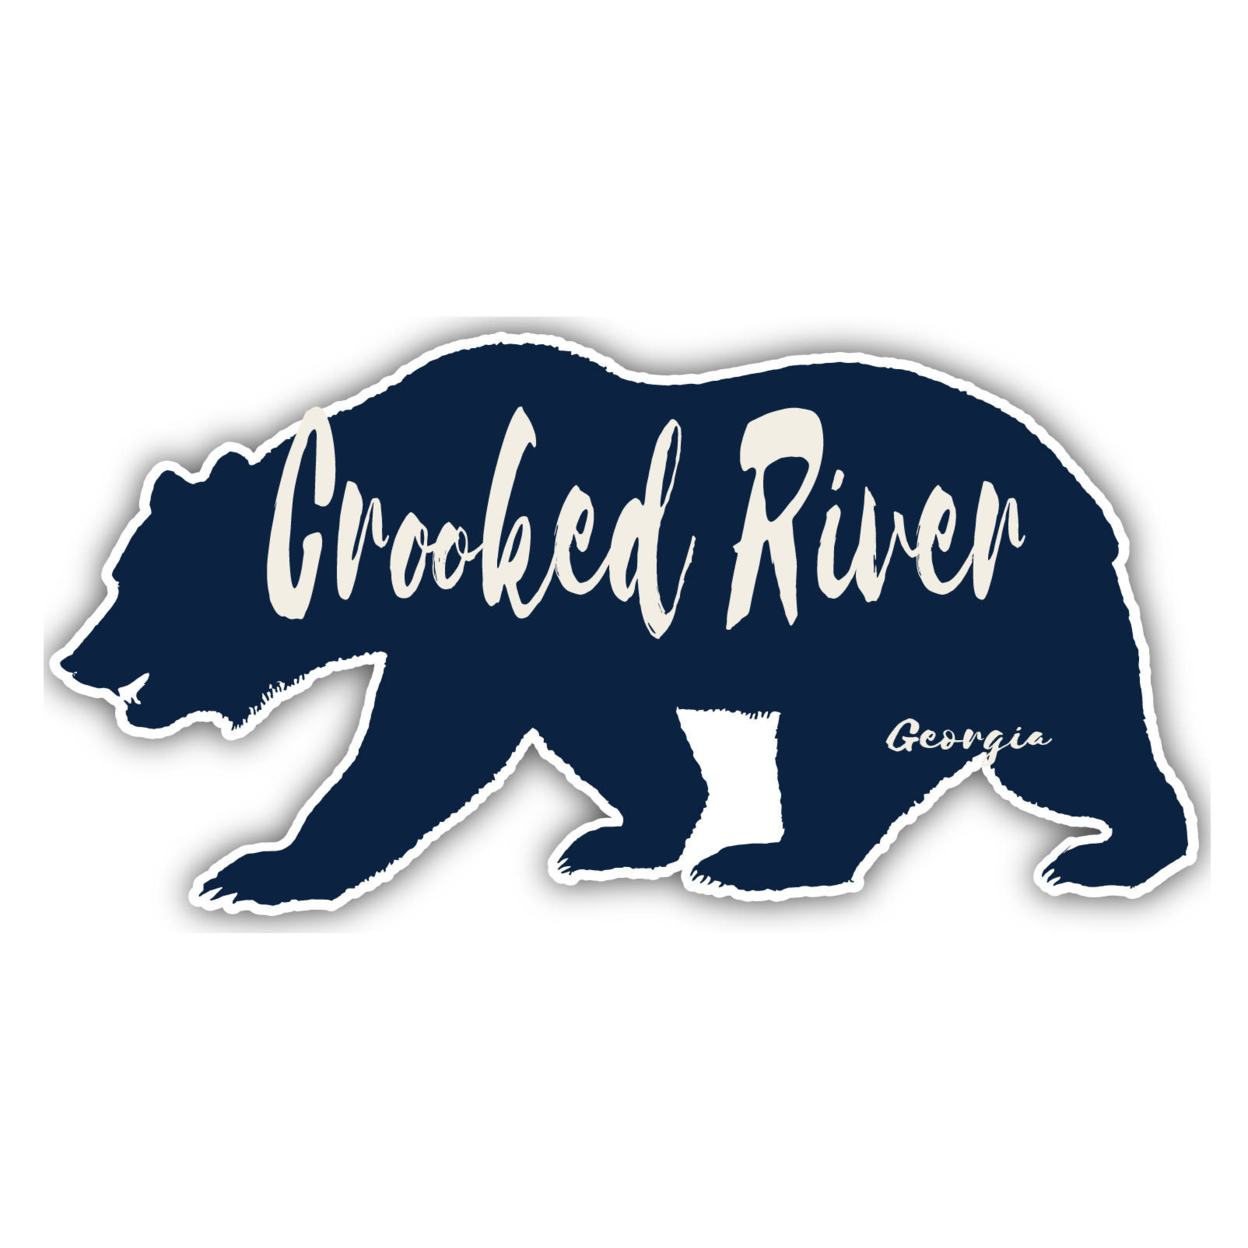 Crooked River Georgia Souvenir Decorative Stickers (Choose Theme And Size) - 4-Pack, 12-Inch, Bear